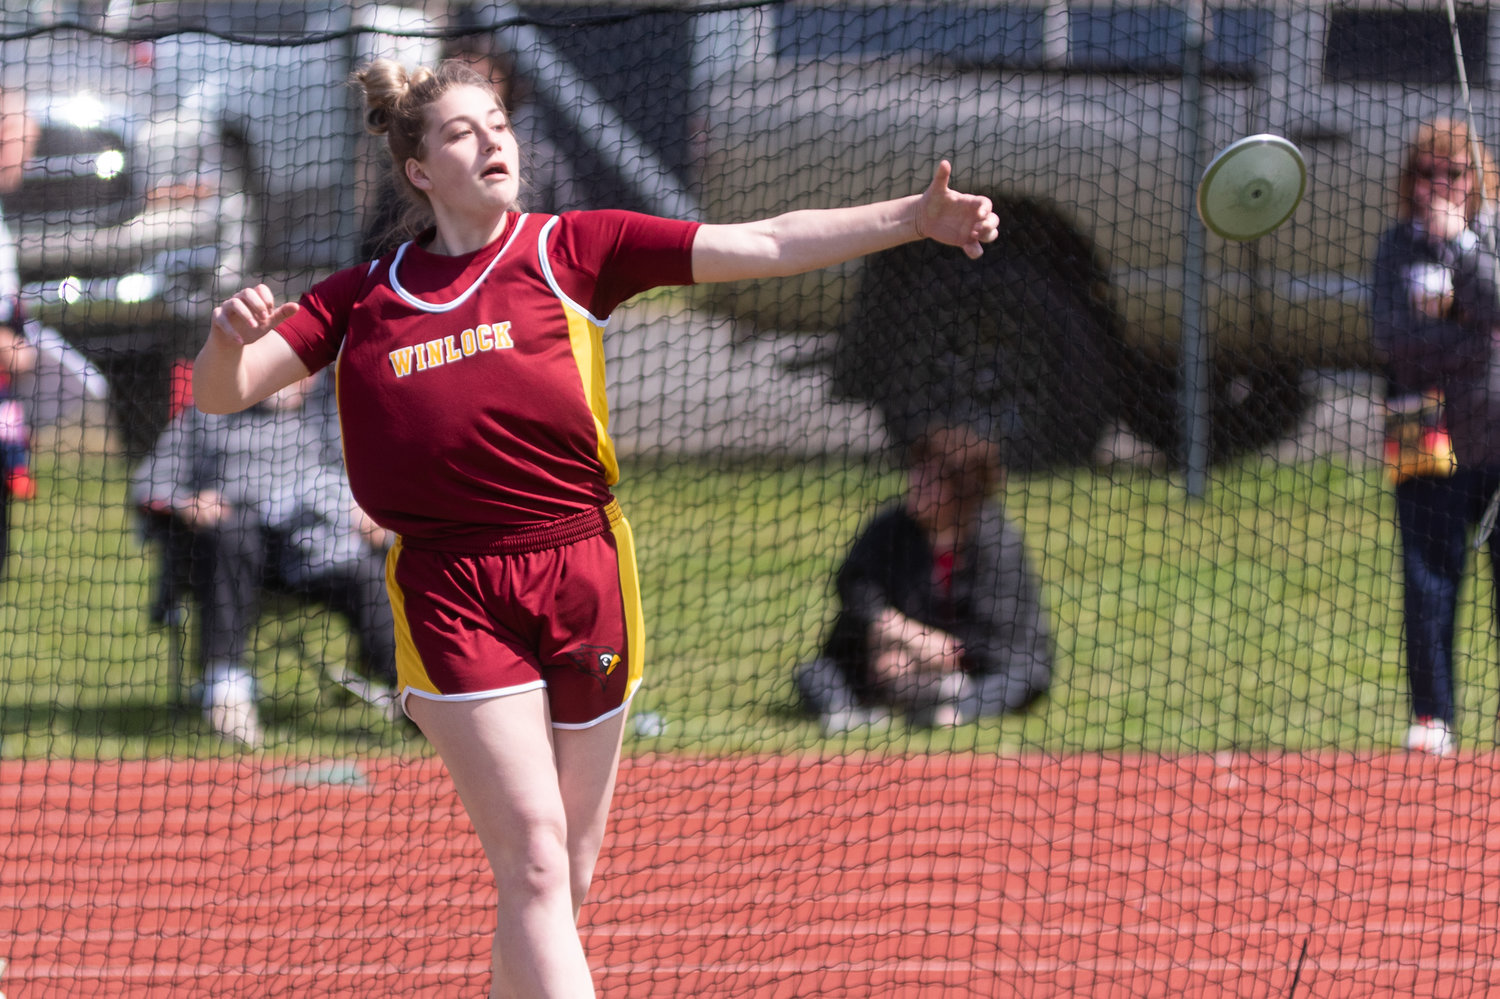 Winlock's Addison Hall competes in the discus at the Chehalis Activators Classic at W.F. West April 23.